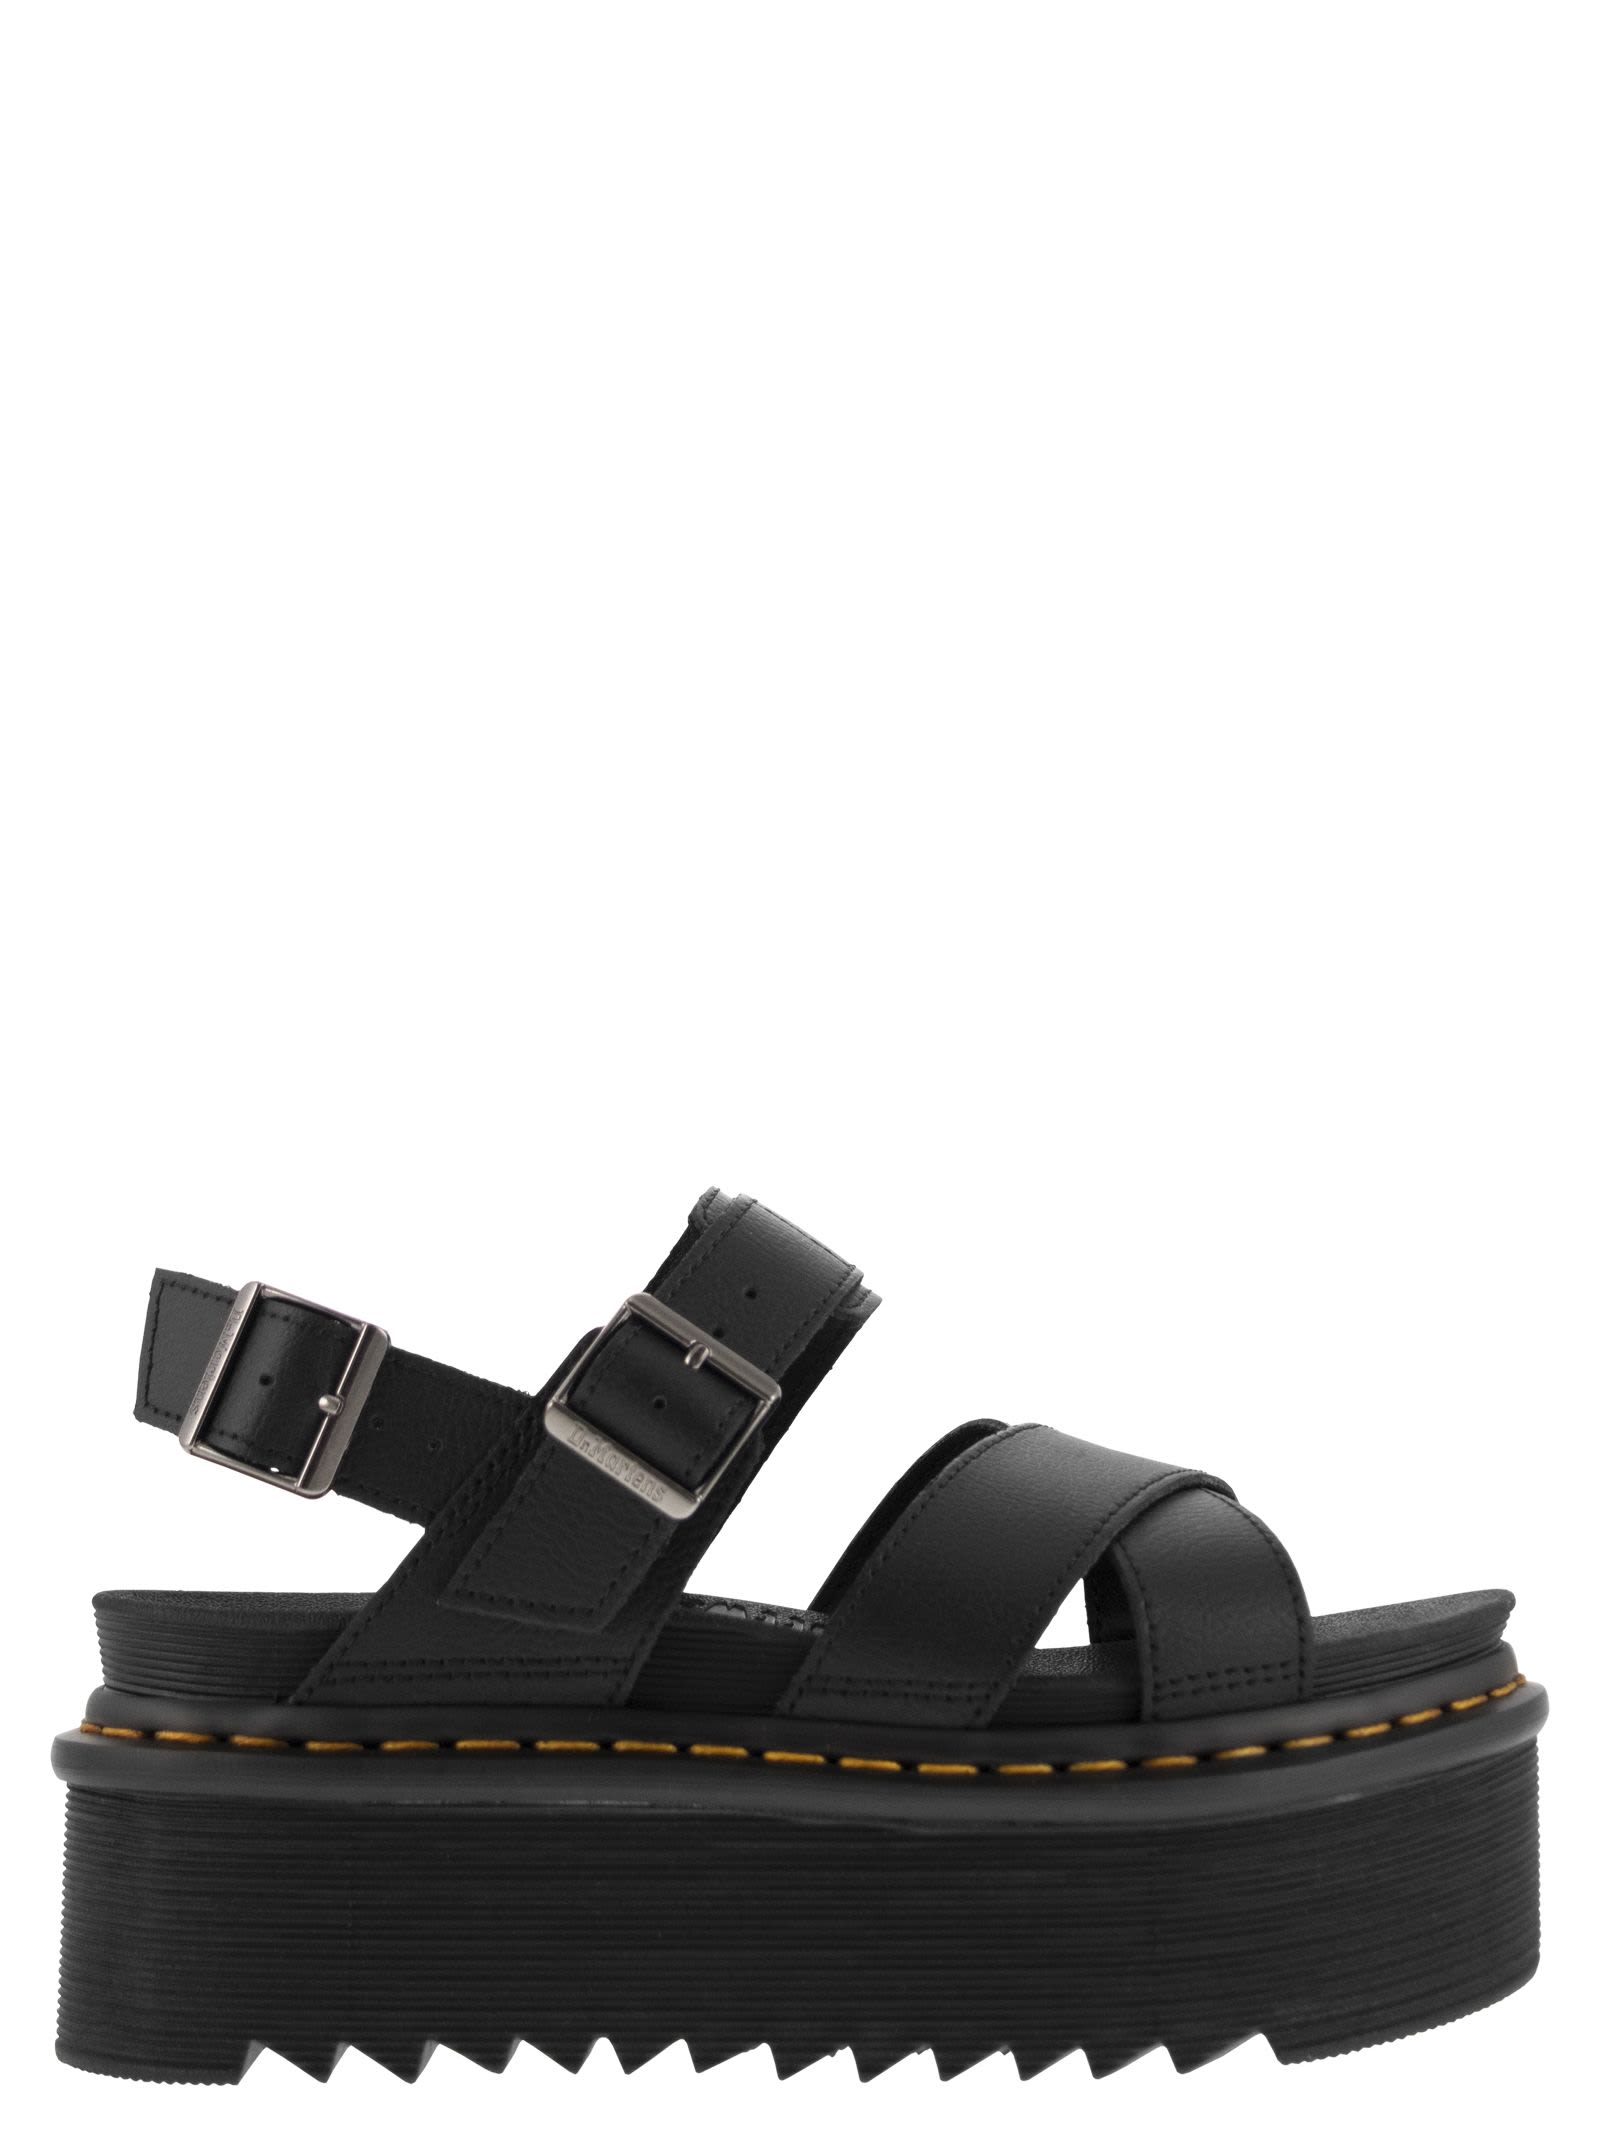 Voss Ii Leather Sandals With Straps